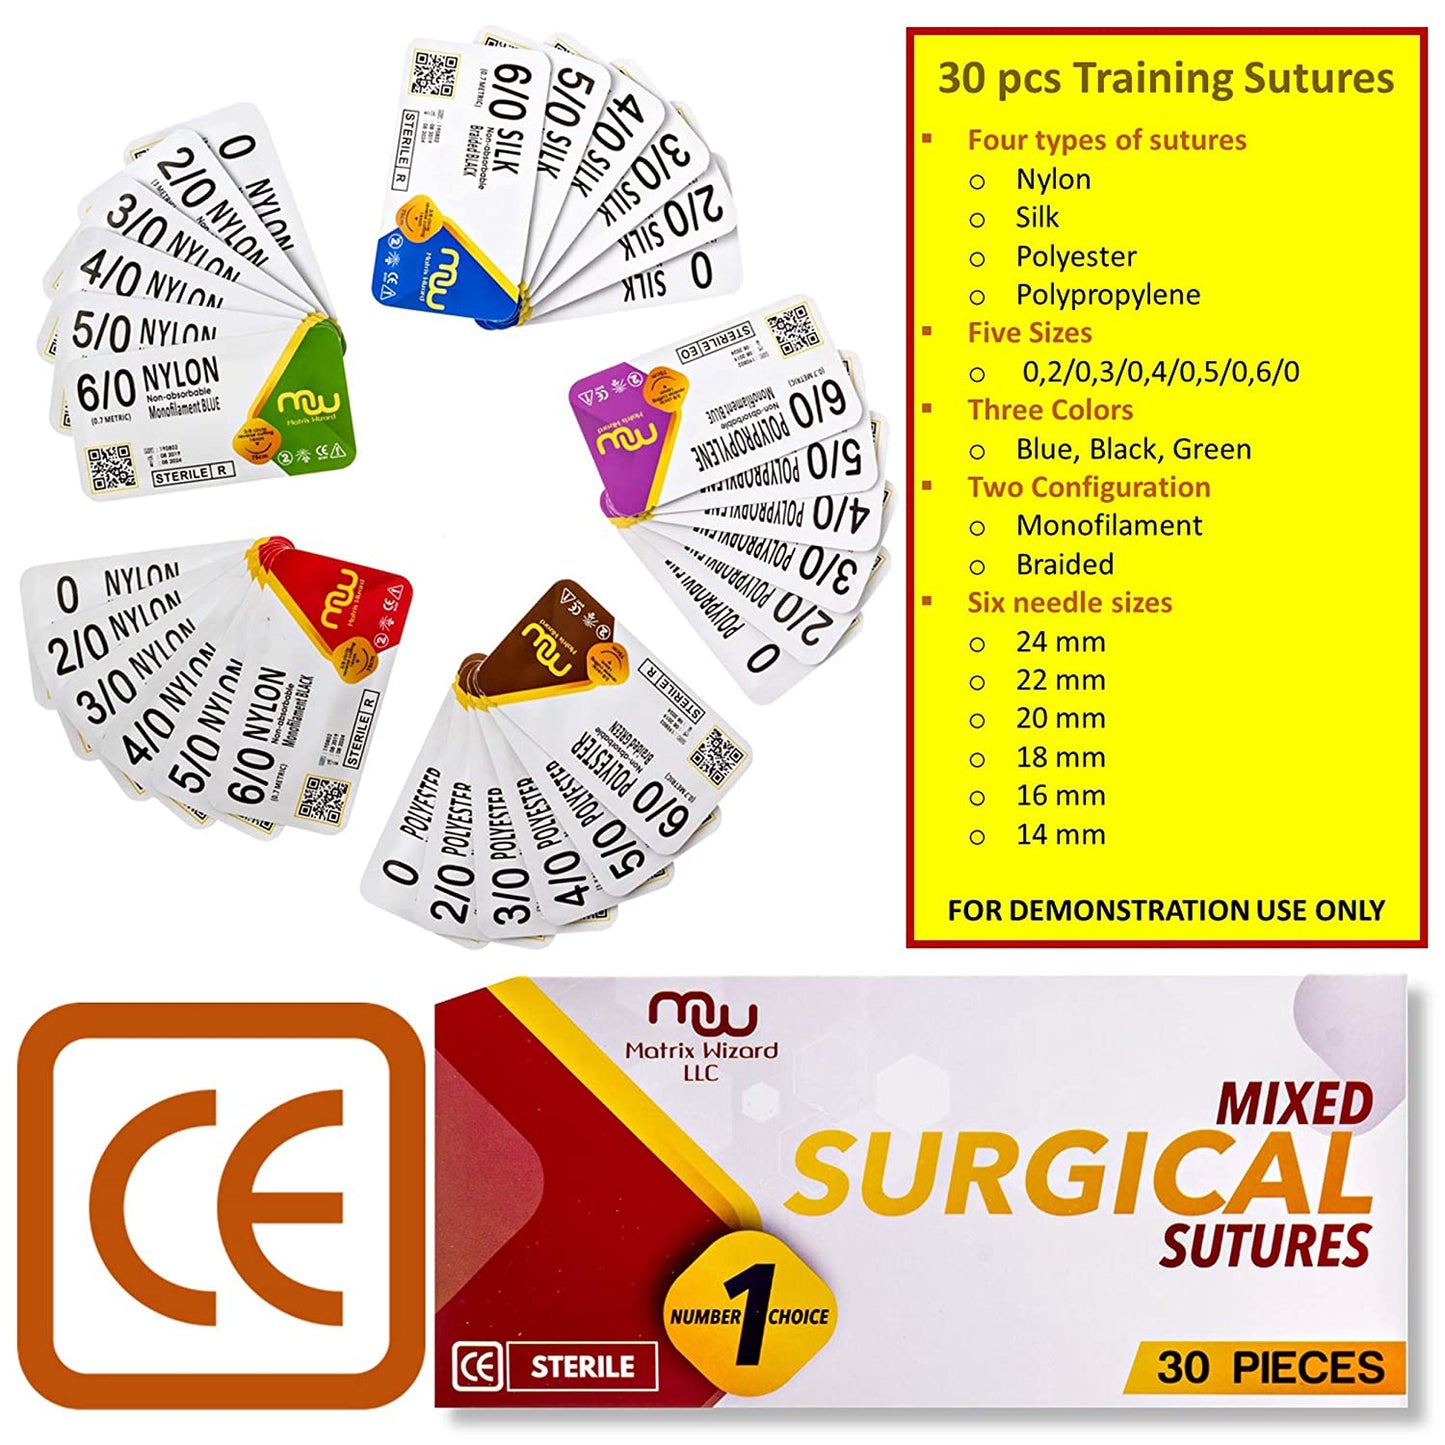 Suture Thread with Needle 30Pk (Mixed 0, 2-0, 3-0, 4-0, 5-0, 6-0) - Practice Suturing; Hospital Clinic Rotation, First Aid Travel Safety, Veterinary Use